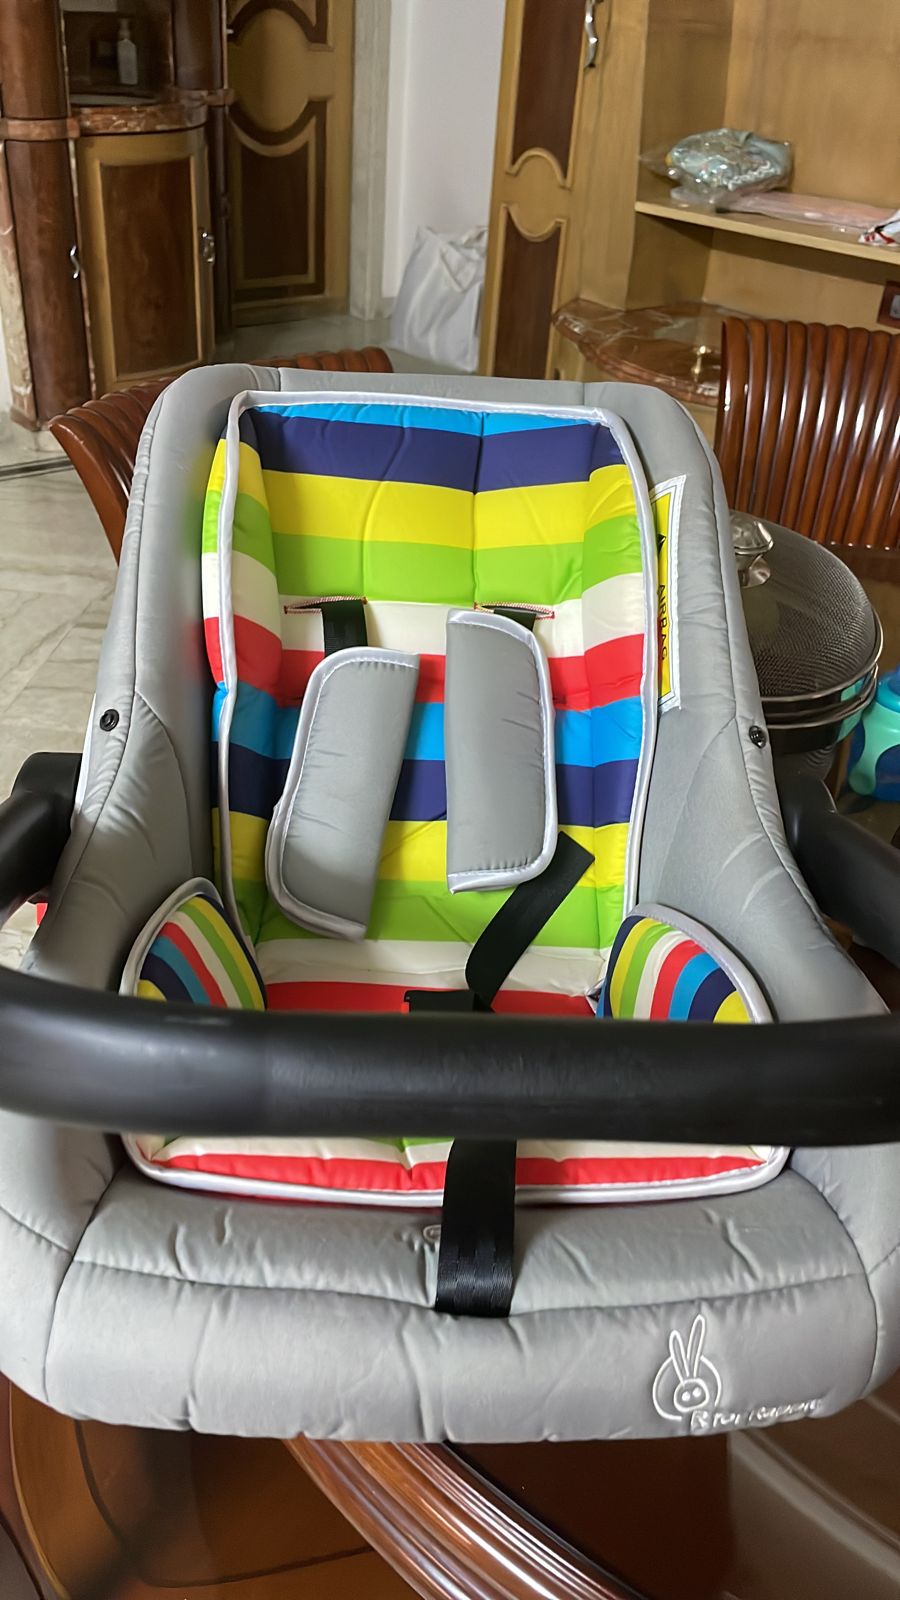 R for Rabbit Picaboo Baby Car Seat